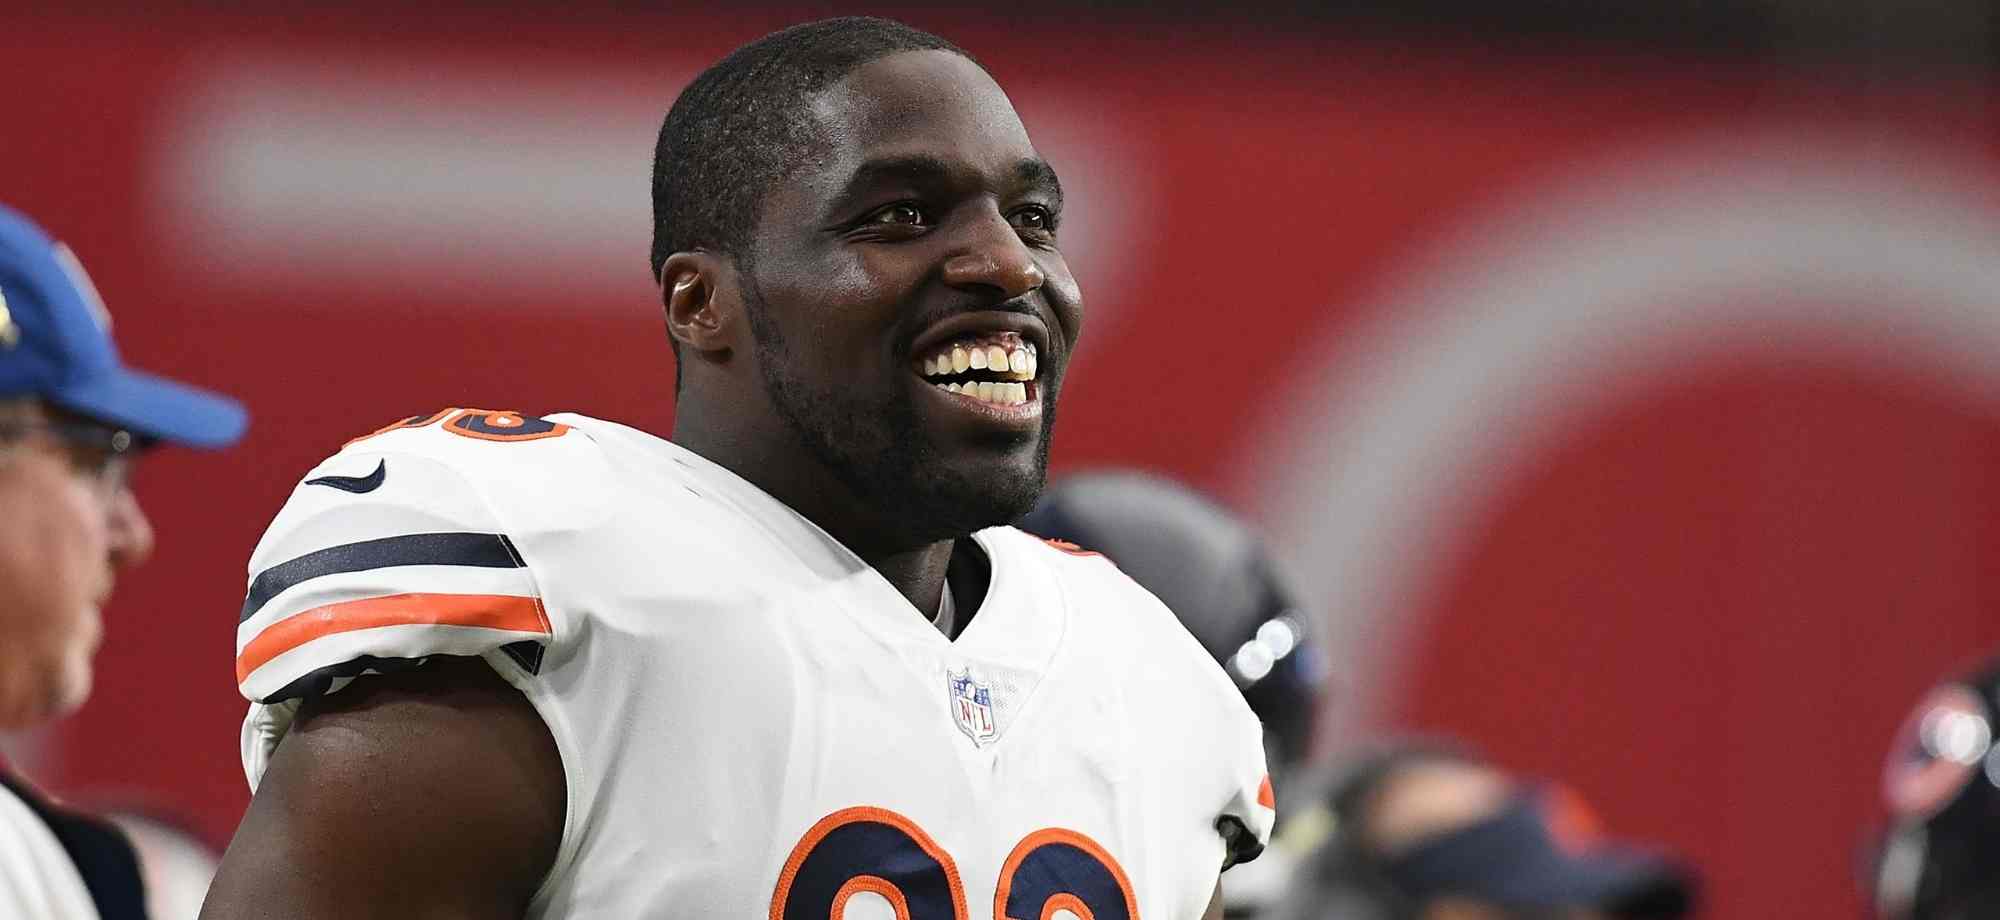 NFL Linebacker and Social Justice Advocate Sam Acho on Doing the Little Things Well